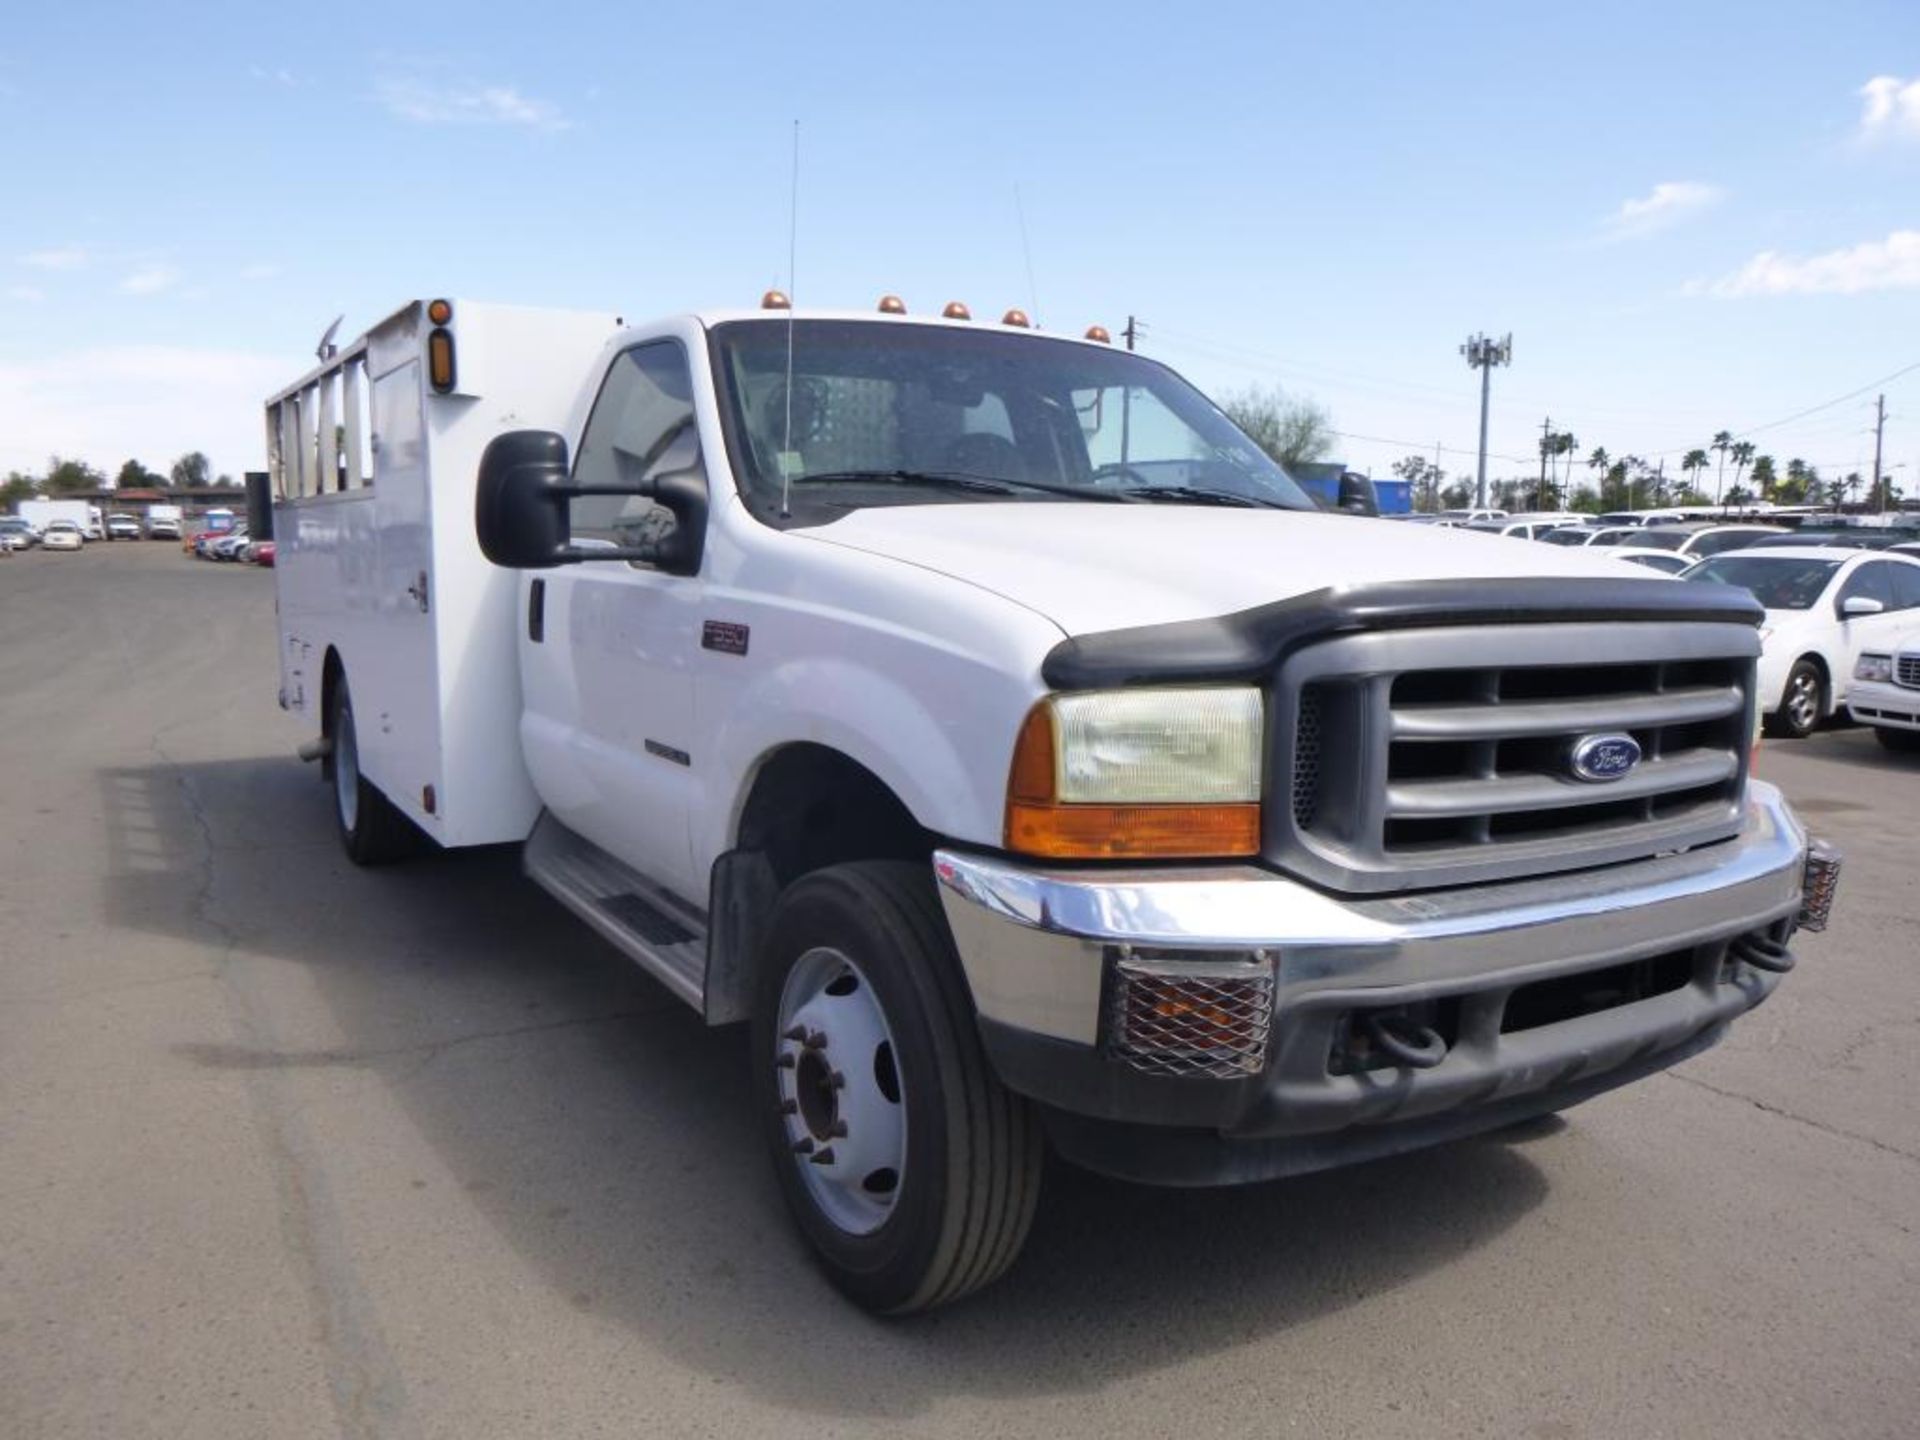 2001 Ford F-550 - Image 4 of 9